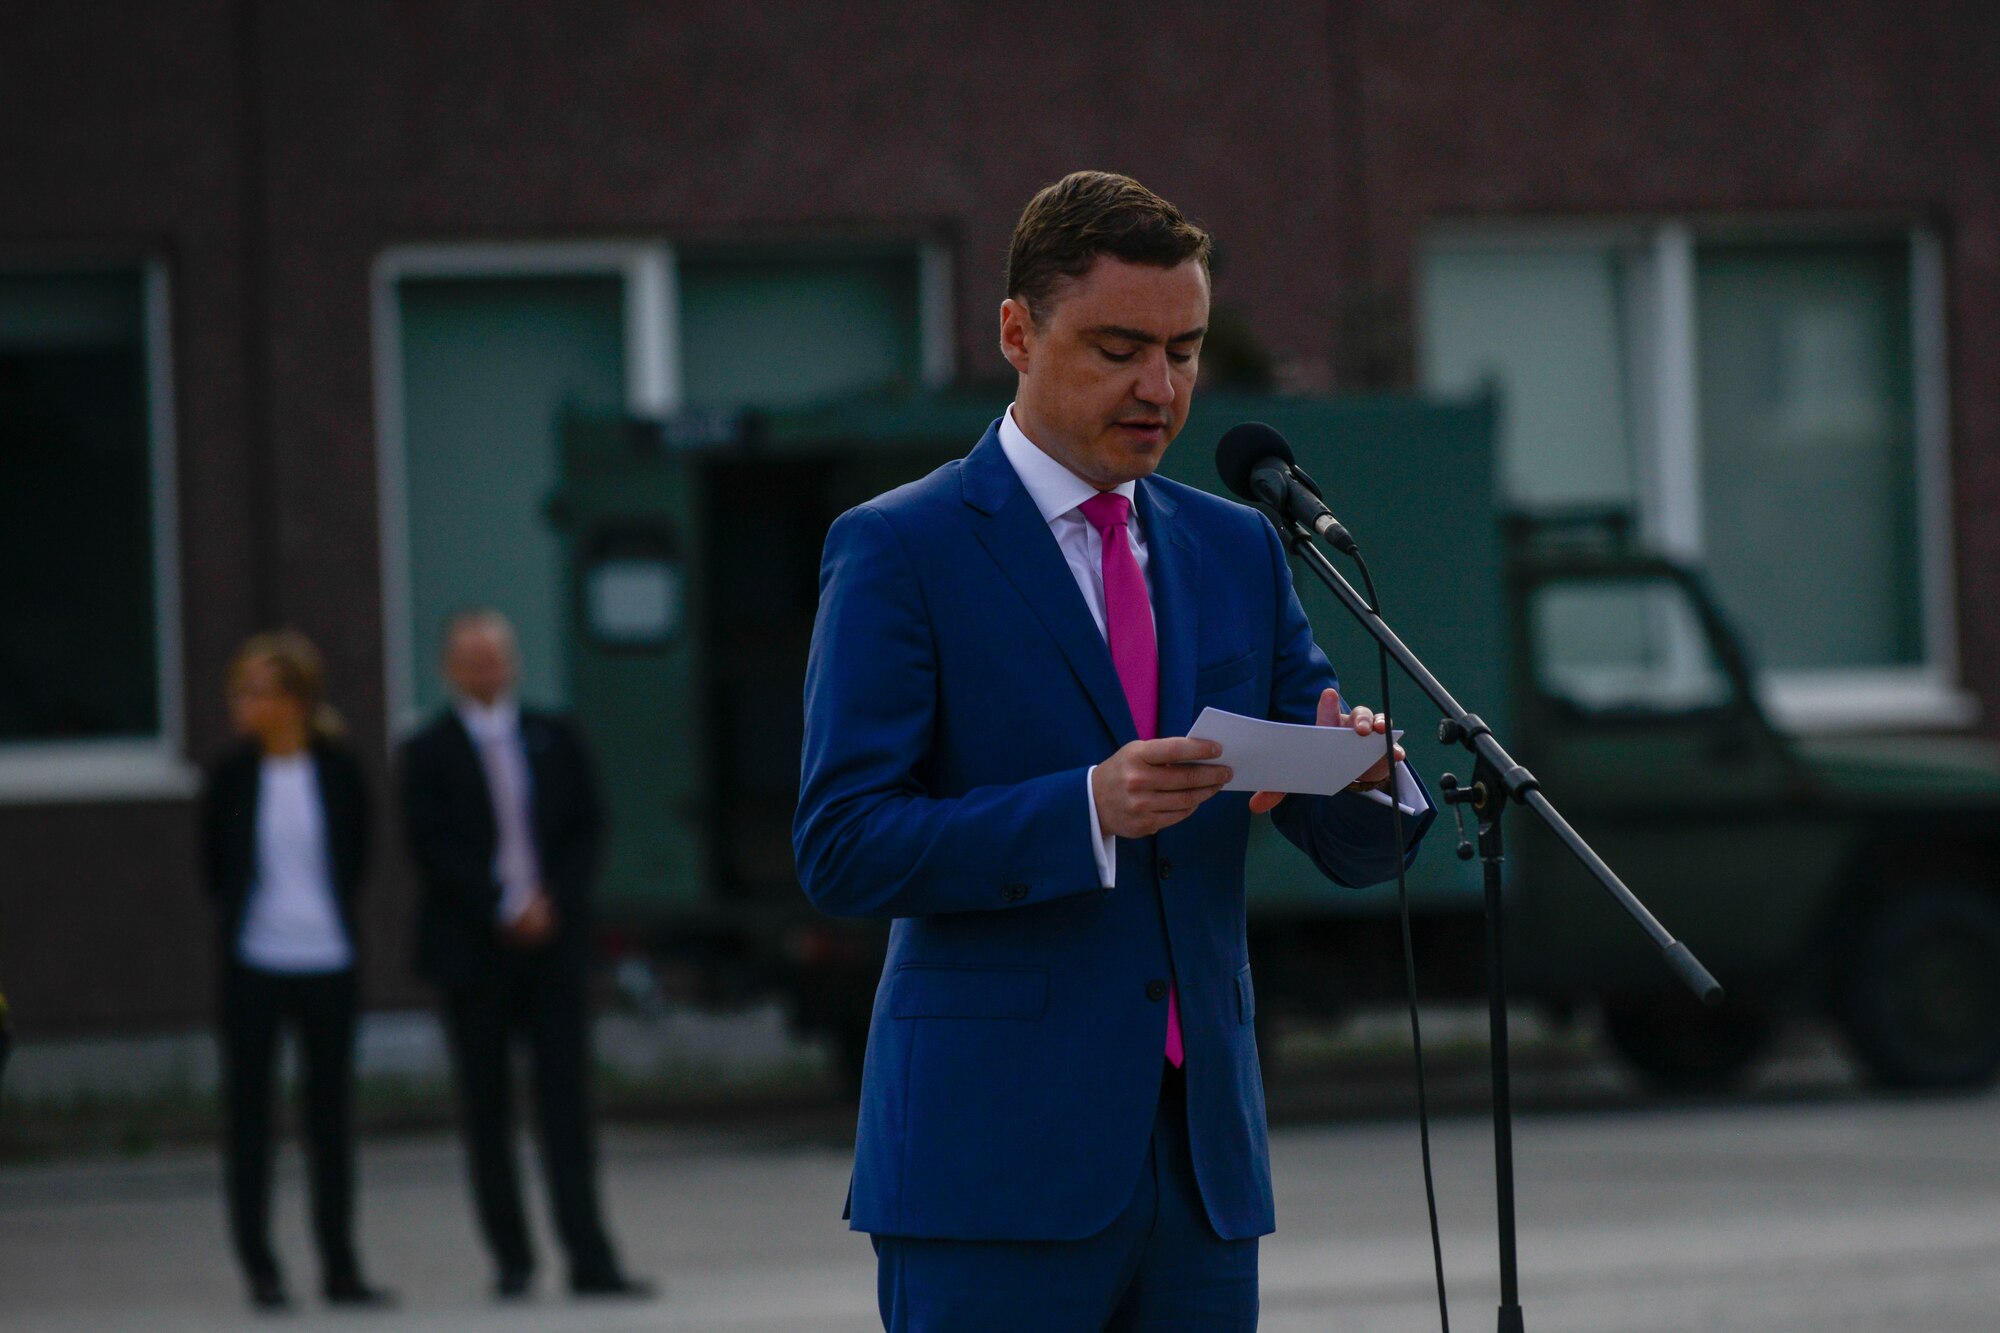 Taavi Roivas, Estonian prime minister, thanks NATO allies for their hard work during  Saber Strike 16 at a closing ceremony at Tapa Training Base, Estonia, June 21, 2016. U.S. forces in Europe participated in Saber Strike 16; a long-standing, U.S. Joint Chiefs of Staff-directed, U.S. Army Europe-led cooperative-training exercise, which has been conducted annually since 2010.  This year’s exercise focused on promoting interoperability with allies and regional partners. The United States has enduring interests in supporting peace and prosperity in Europe and bolstering the strength and vitality of NATO, which is critical to global security. (U.S. Air Force photo/Senior Airman Nicole Keim)